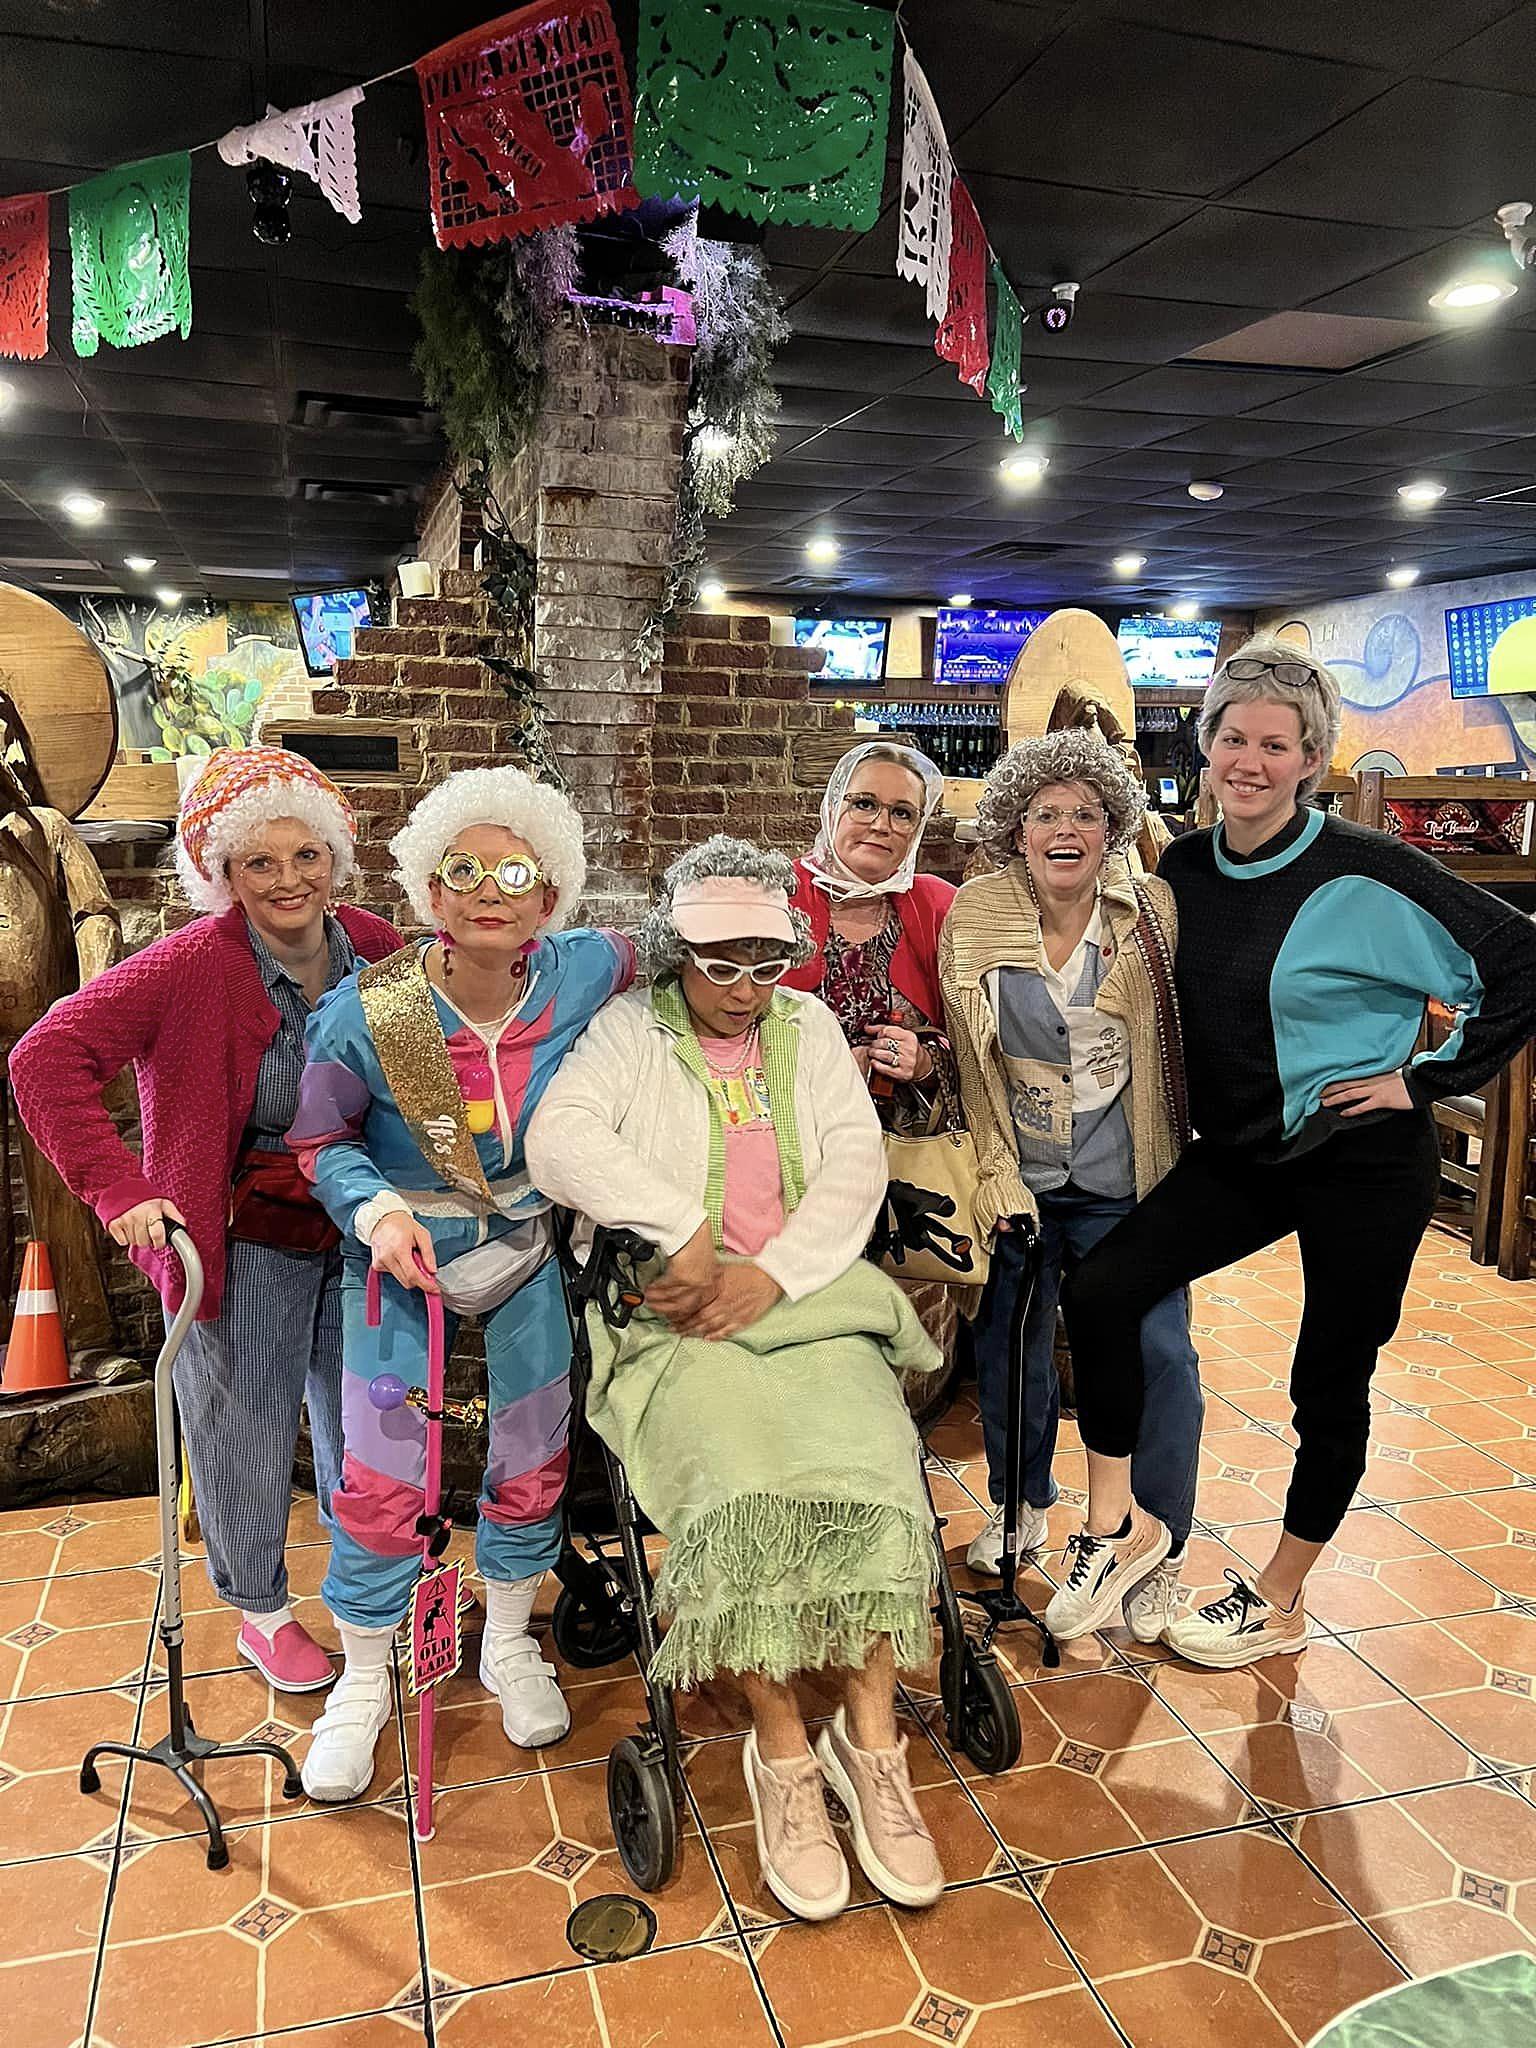 KY Gals Host Granny-Themed Birthday & Their Outfits Are HILARIOUS